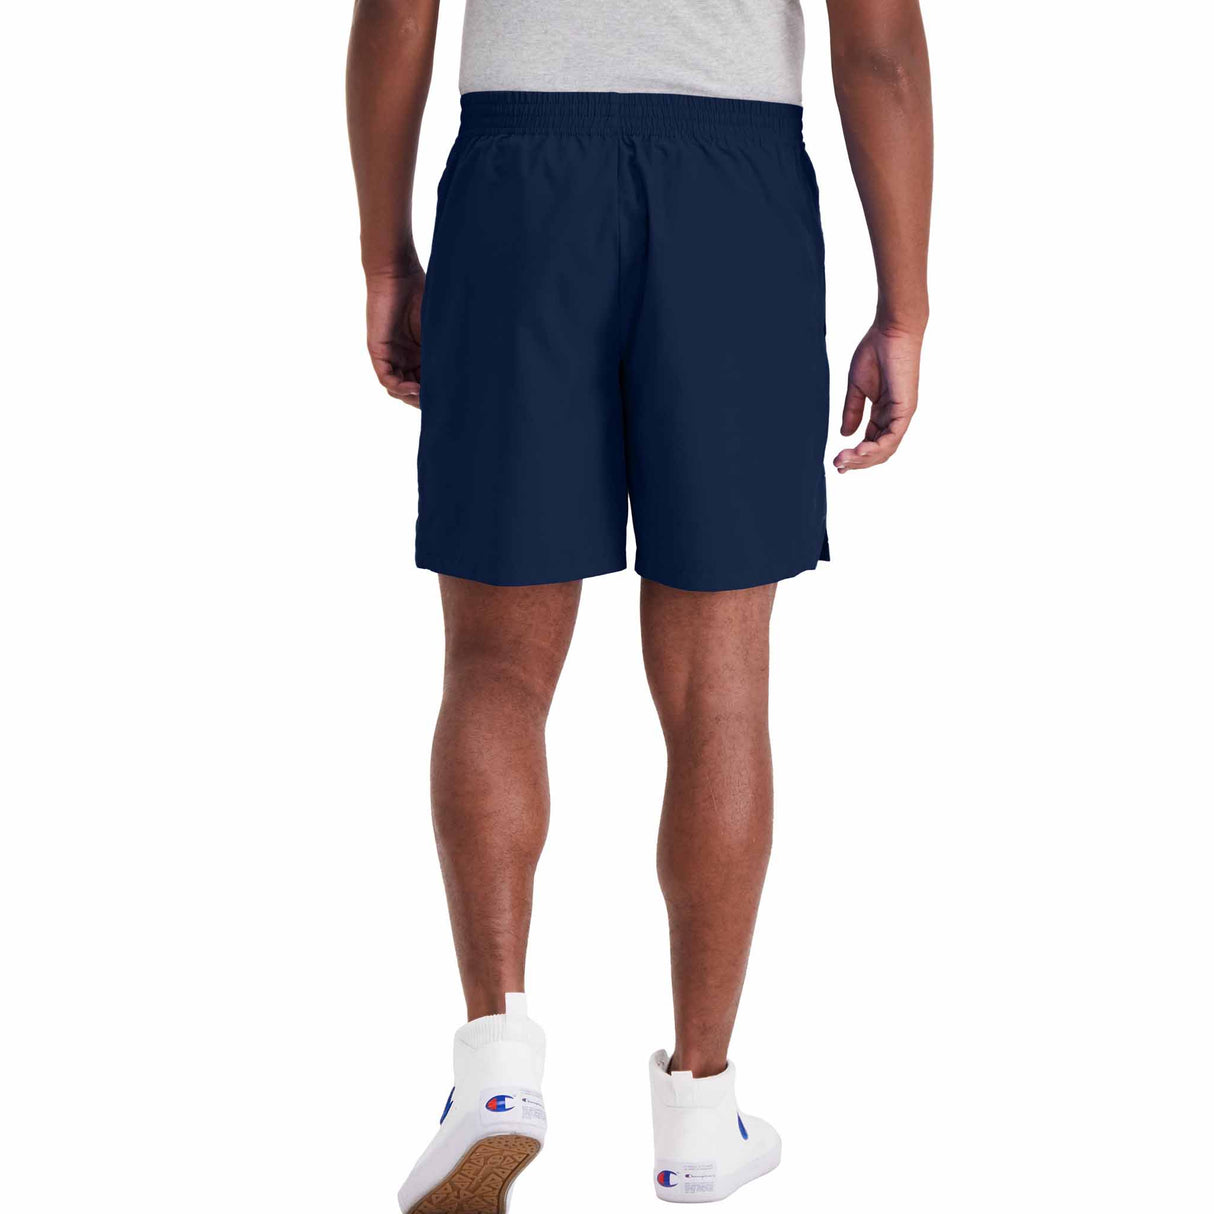 Champion 7 Inch Woven Sport Shorts W/Out Liner short sans doublure pour homme - Athletic Navy - Dos